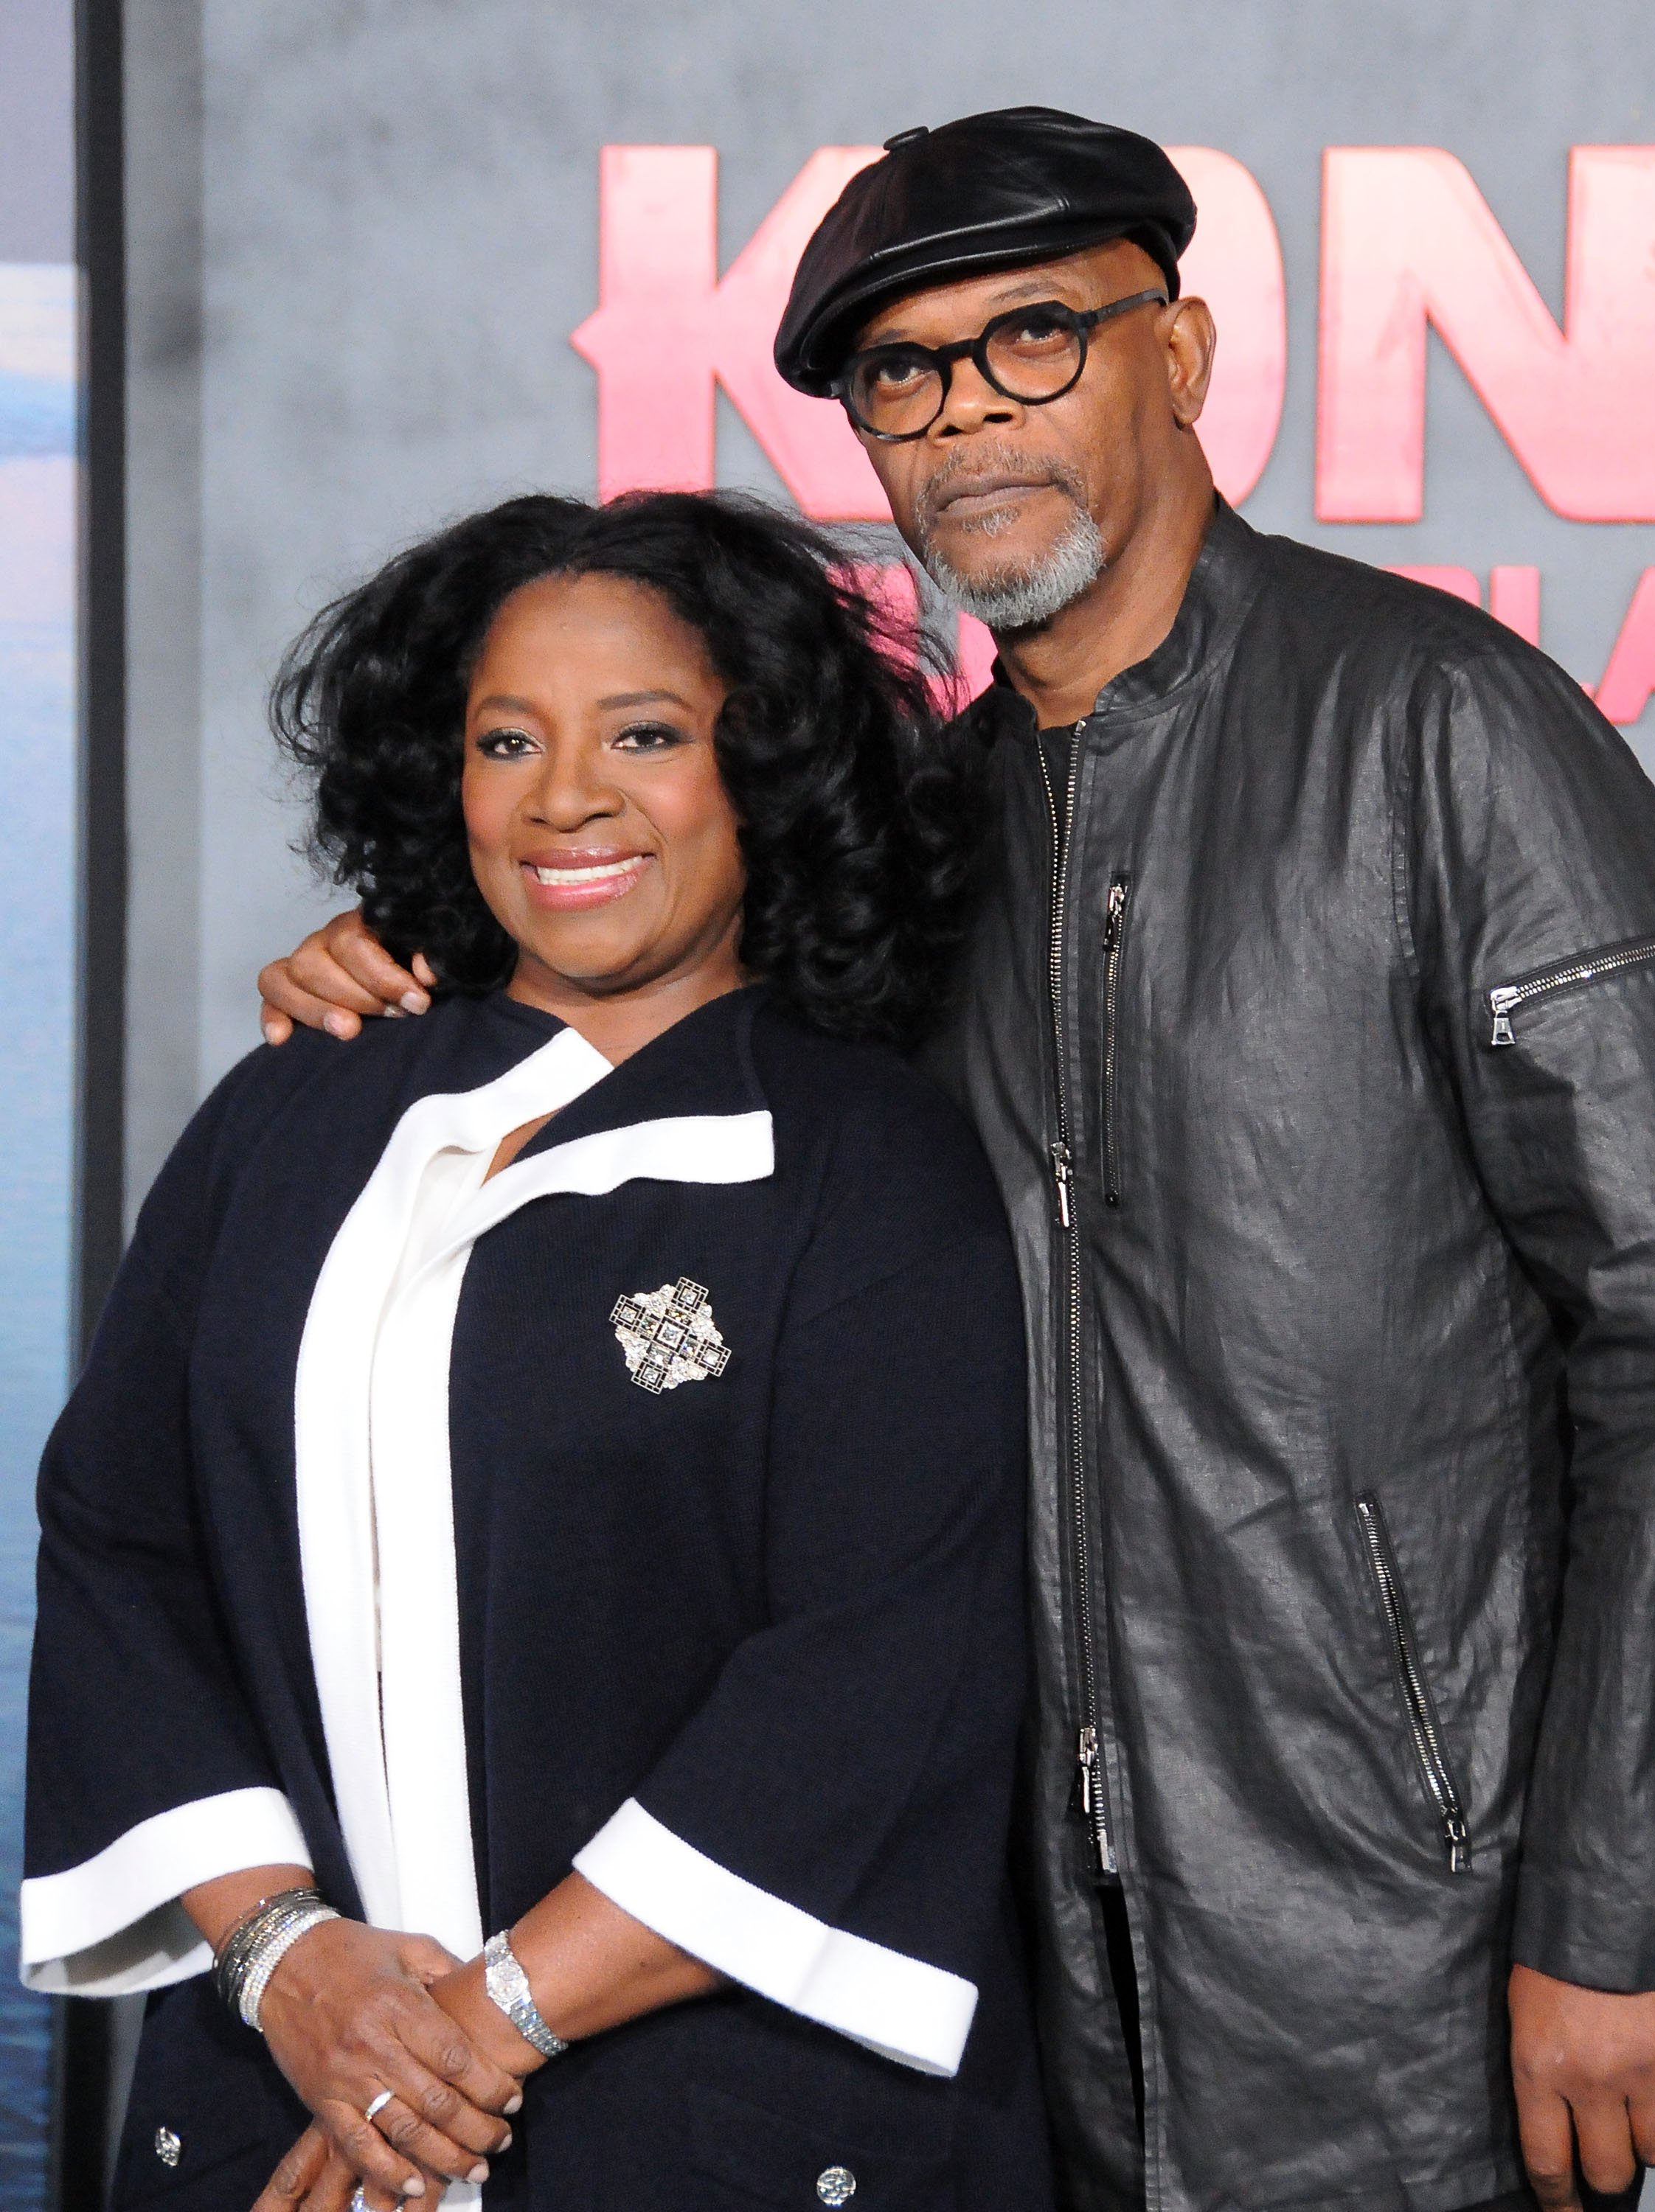 LaTanya Richardson and Samuel L. Jackson attend the premiere "Kong: Skull Island" at Dolby Theatre on March 8, 2017 in Hollywood, California l Source: Getty Images